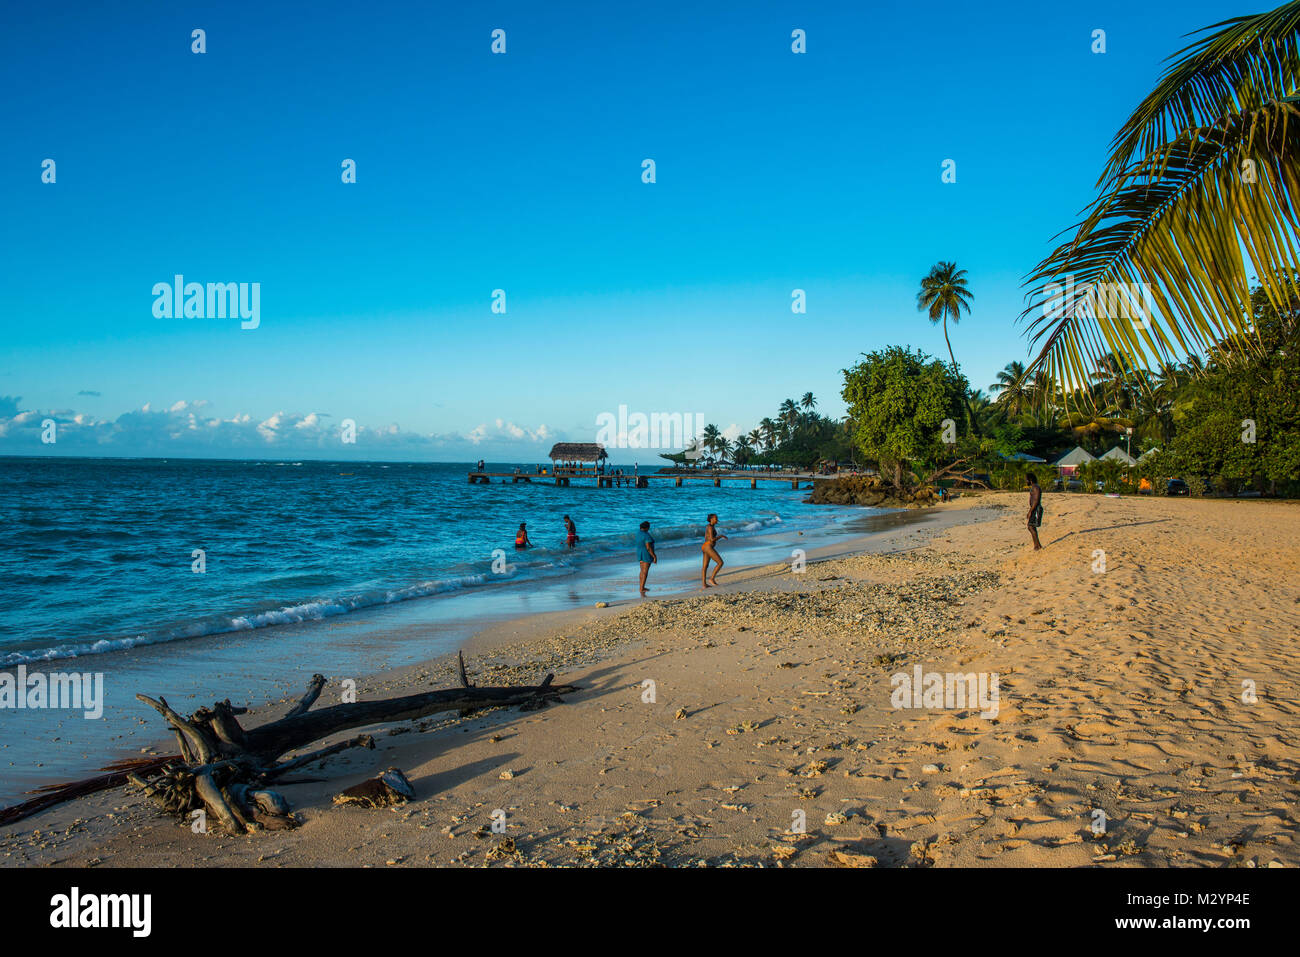 Sunset at the beach of Pigeon point, Tobago, Trinidad and Tobago, Caribbean Stock Photo